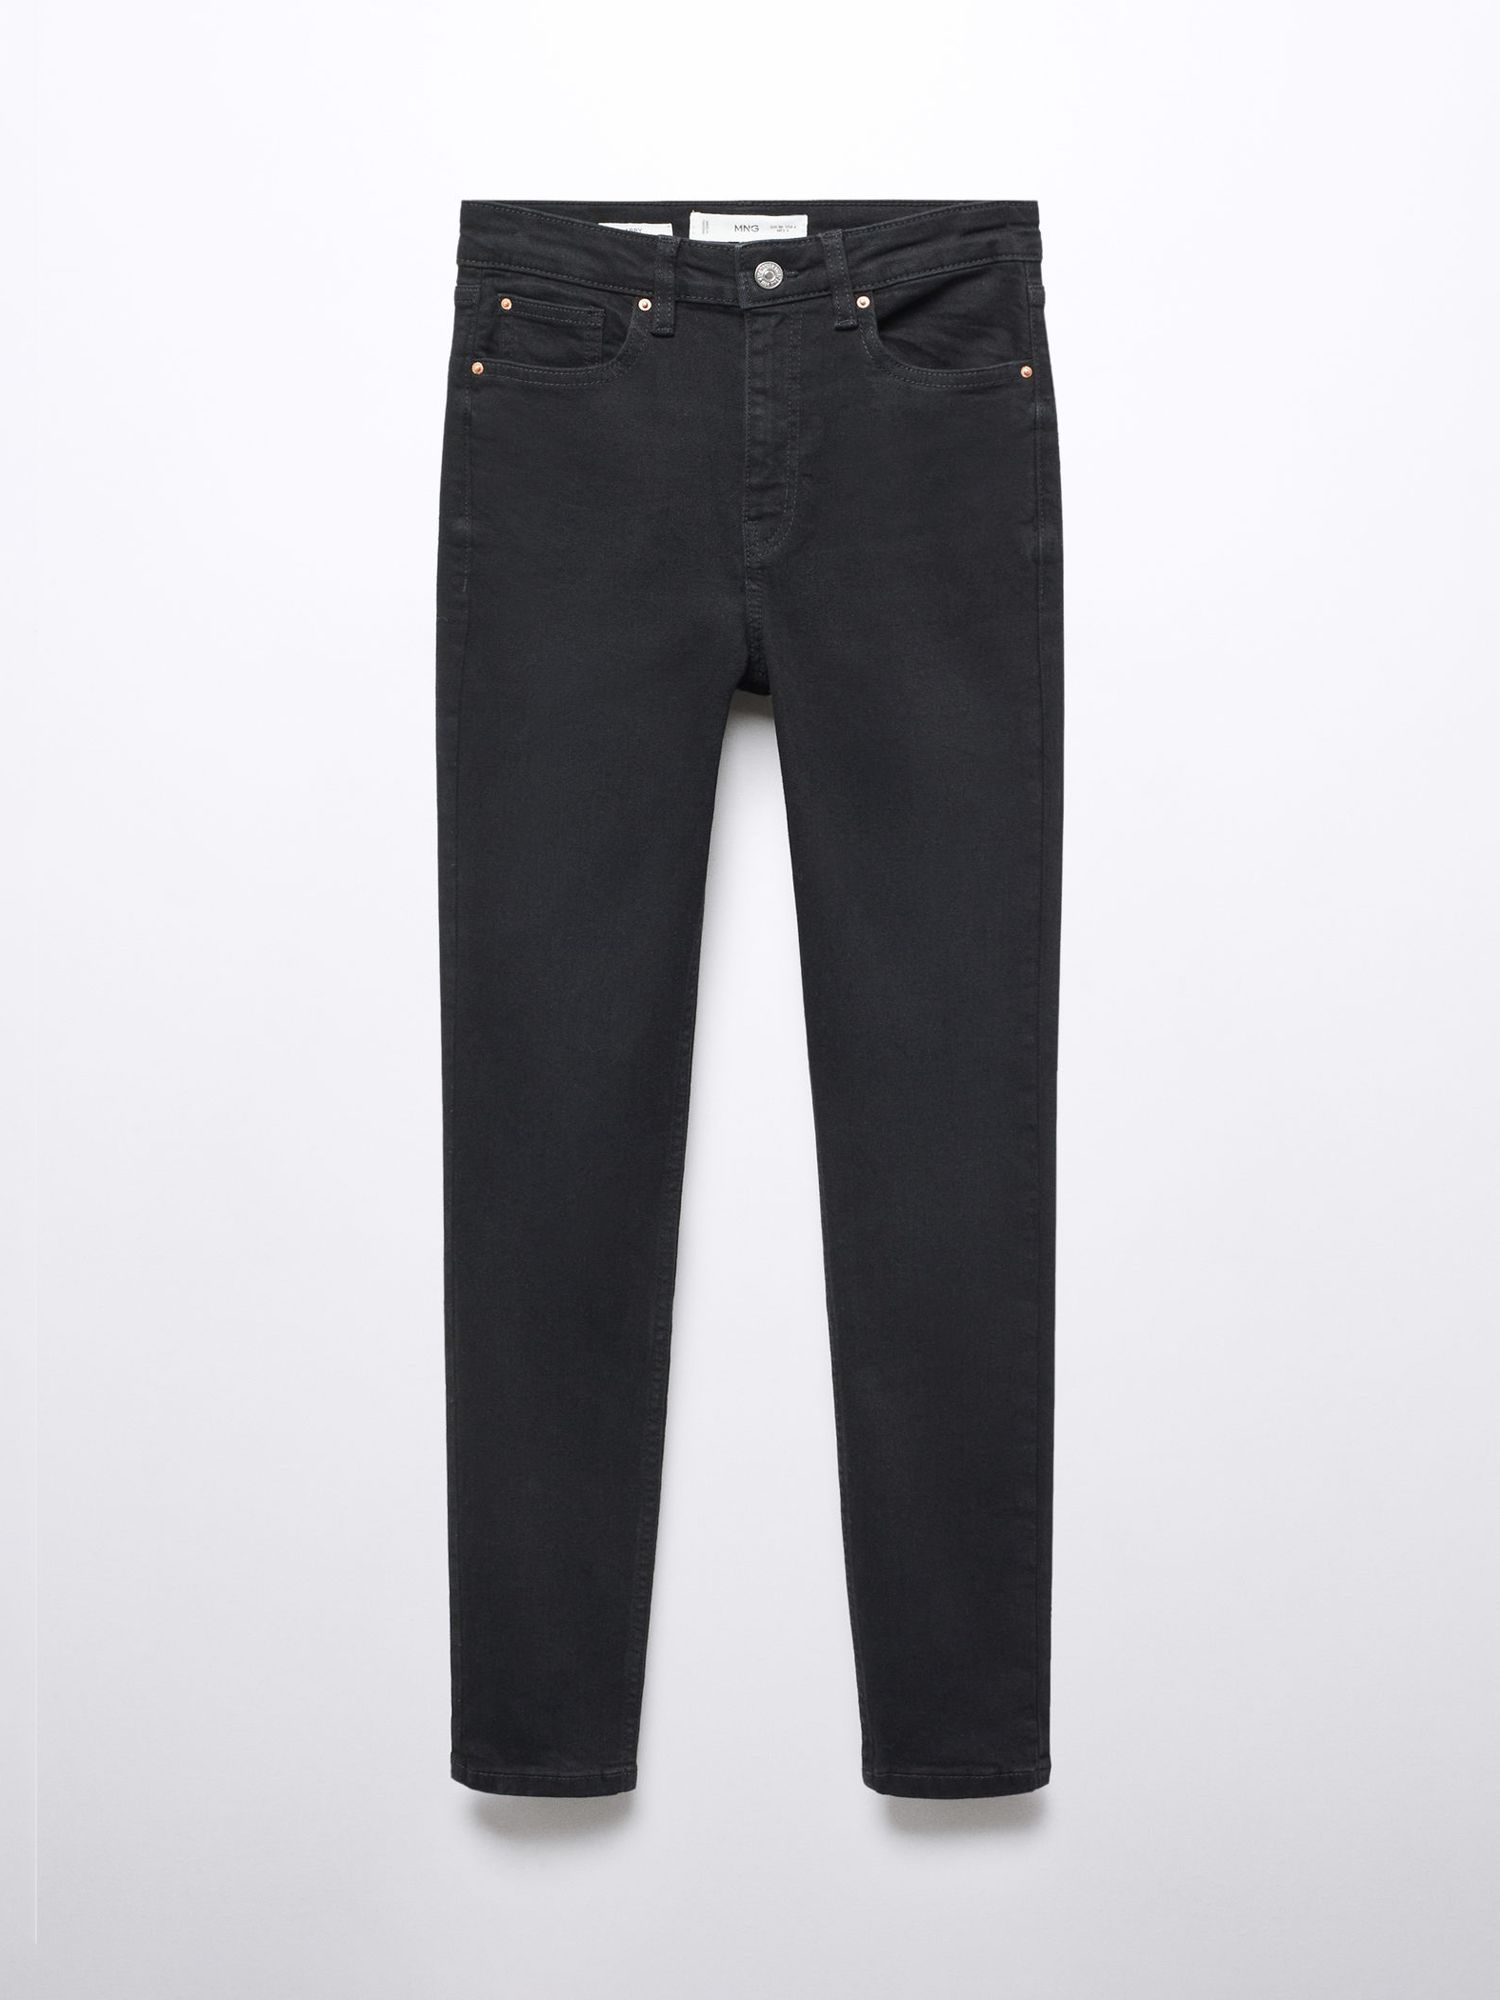 Mango Abby High Rise Skinny Jeans, Open Grey at John Lewis & Partners